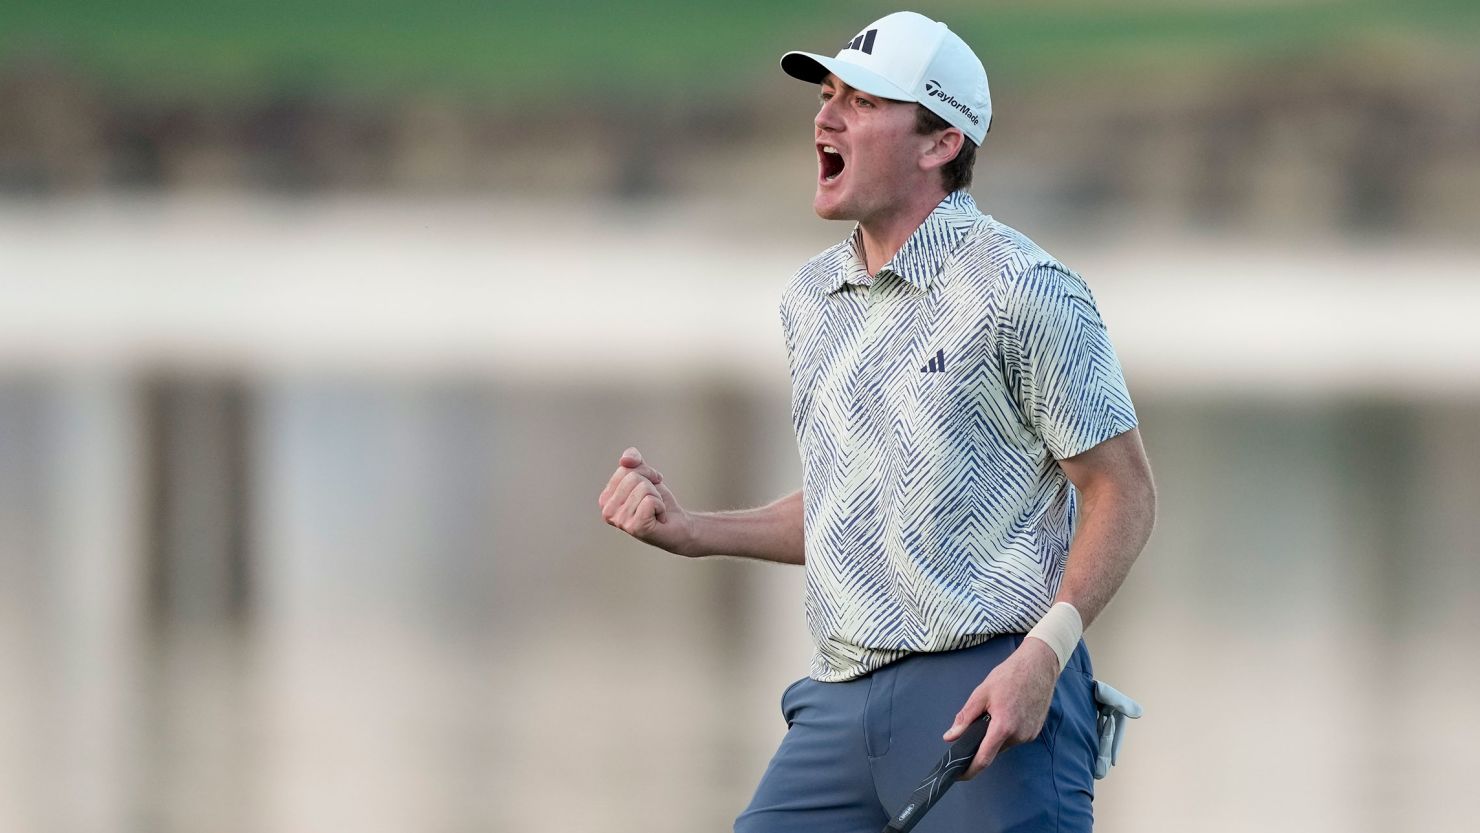 Nick Dunlap: A 20-year-old amateur golfer just won a PGA Tour event. But  he's not allowed to collect the $1.5 million prize